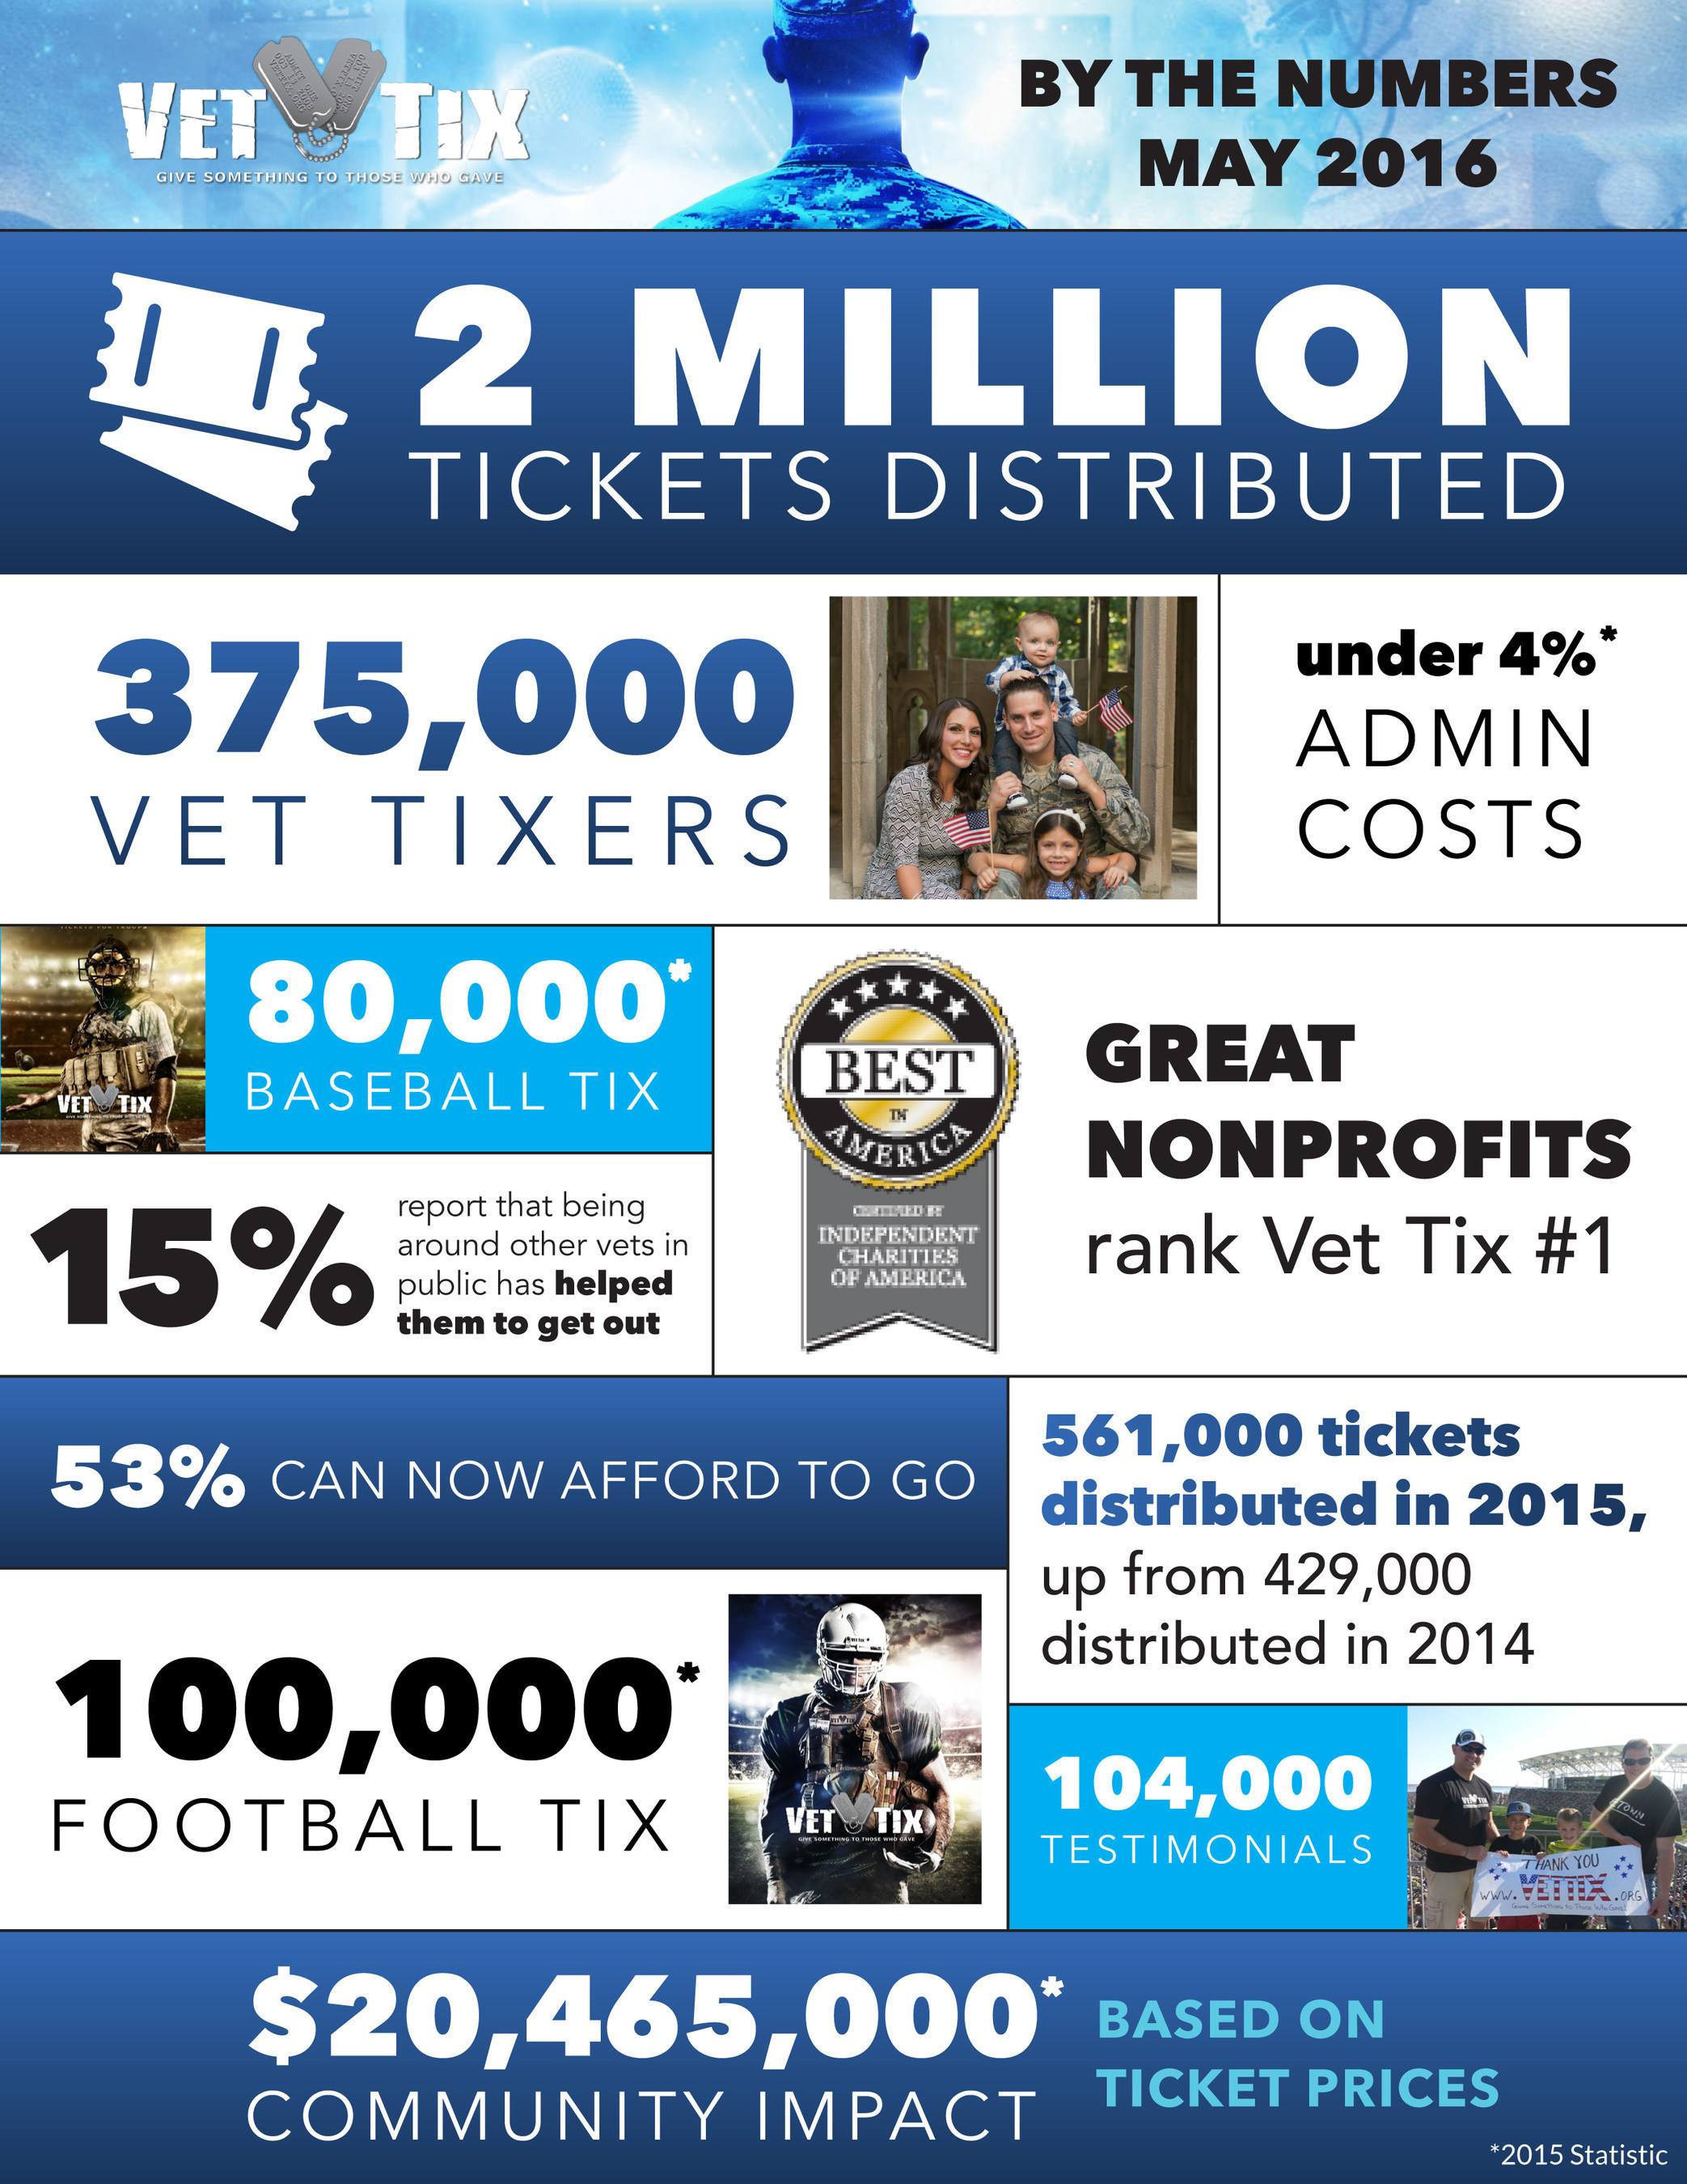 Vet Tix by the numbers